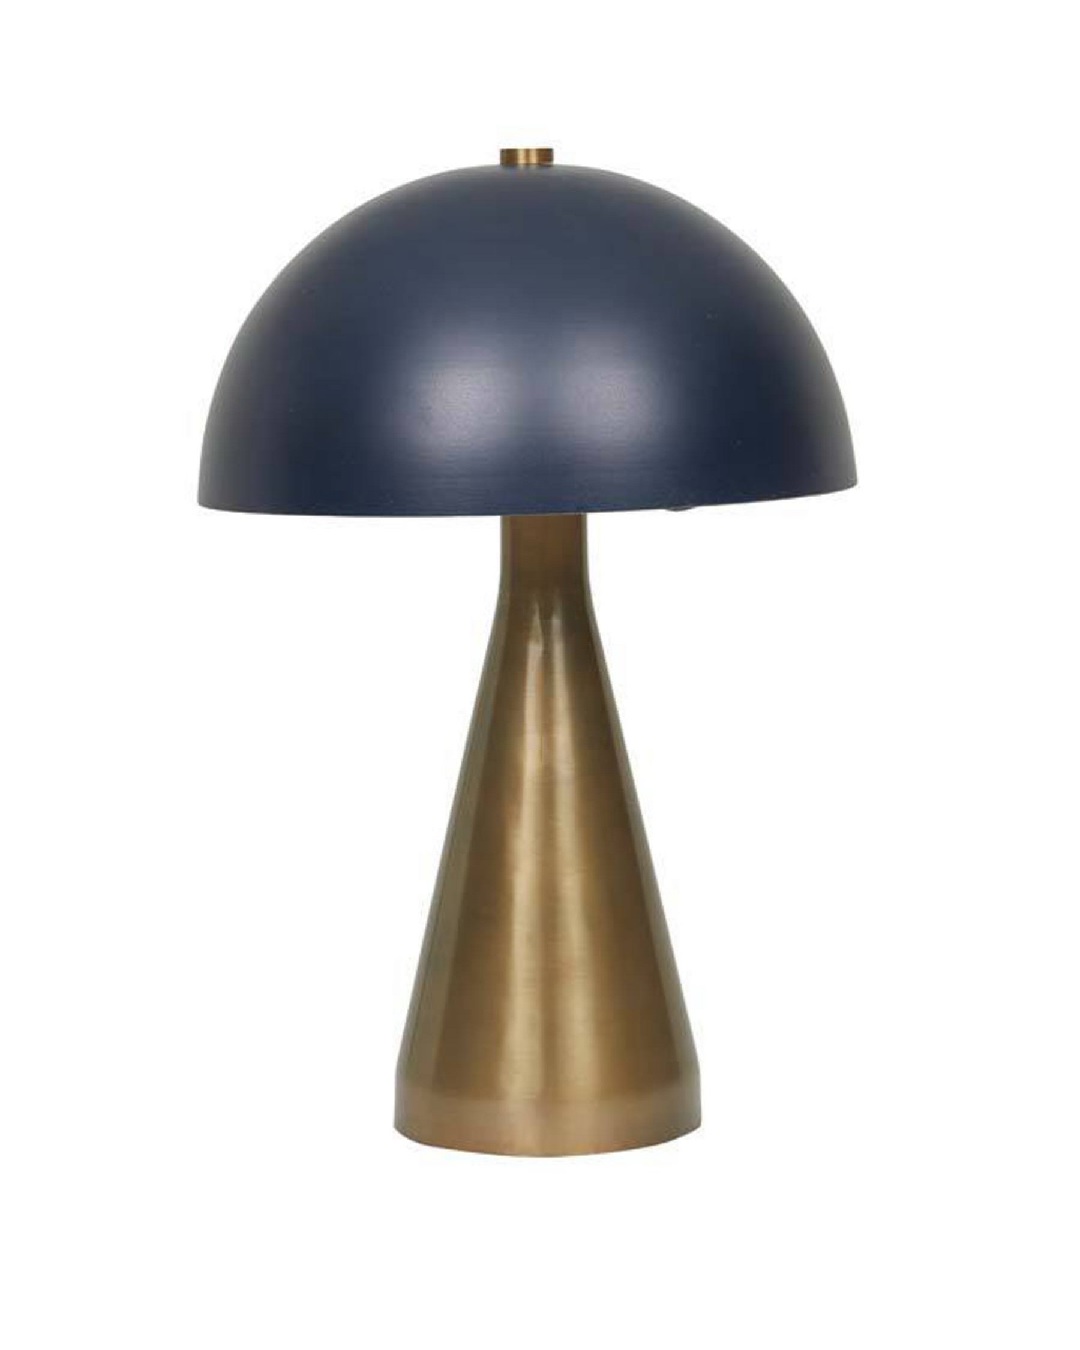 Easton dome table lamp